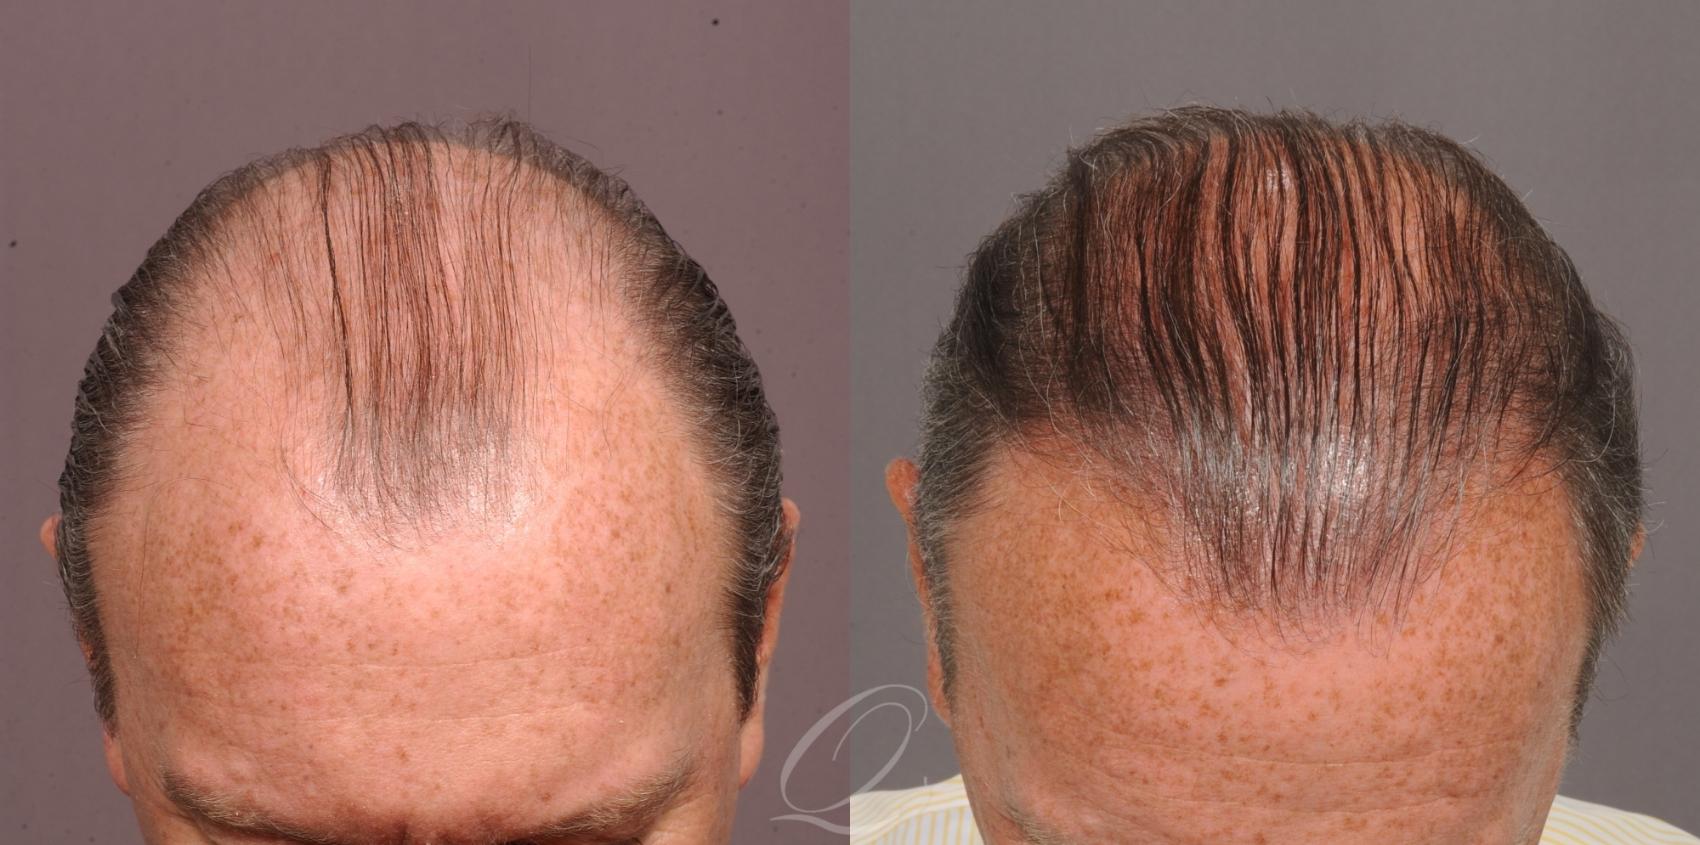 FUT Case 1001515 Before & After Top Down | Rochester, Buffalo, & Syracuse, NY | Quatela Center for Hair Restoration